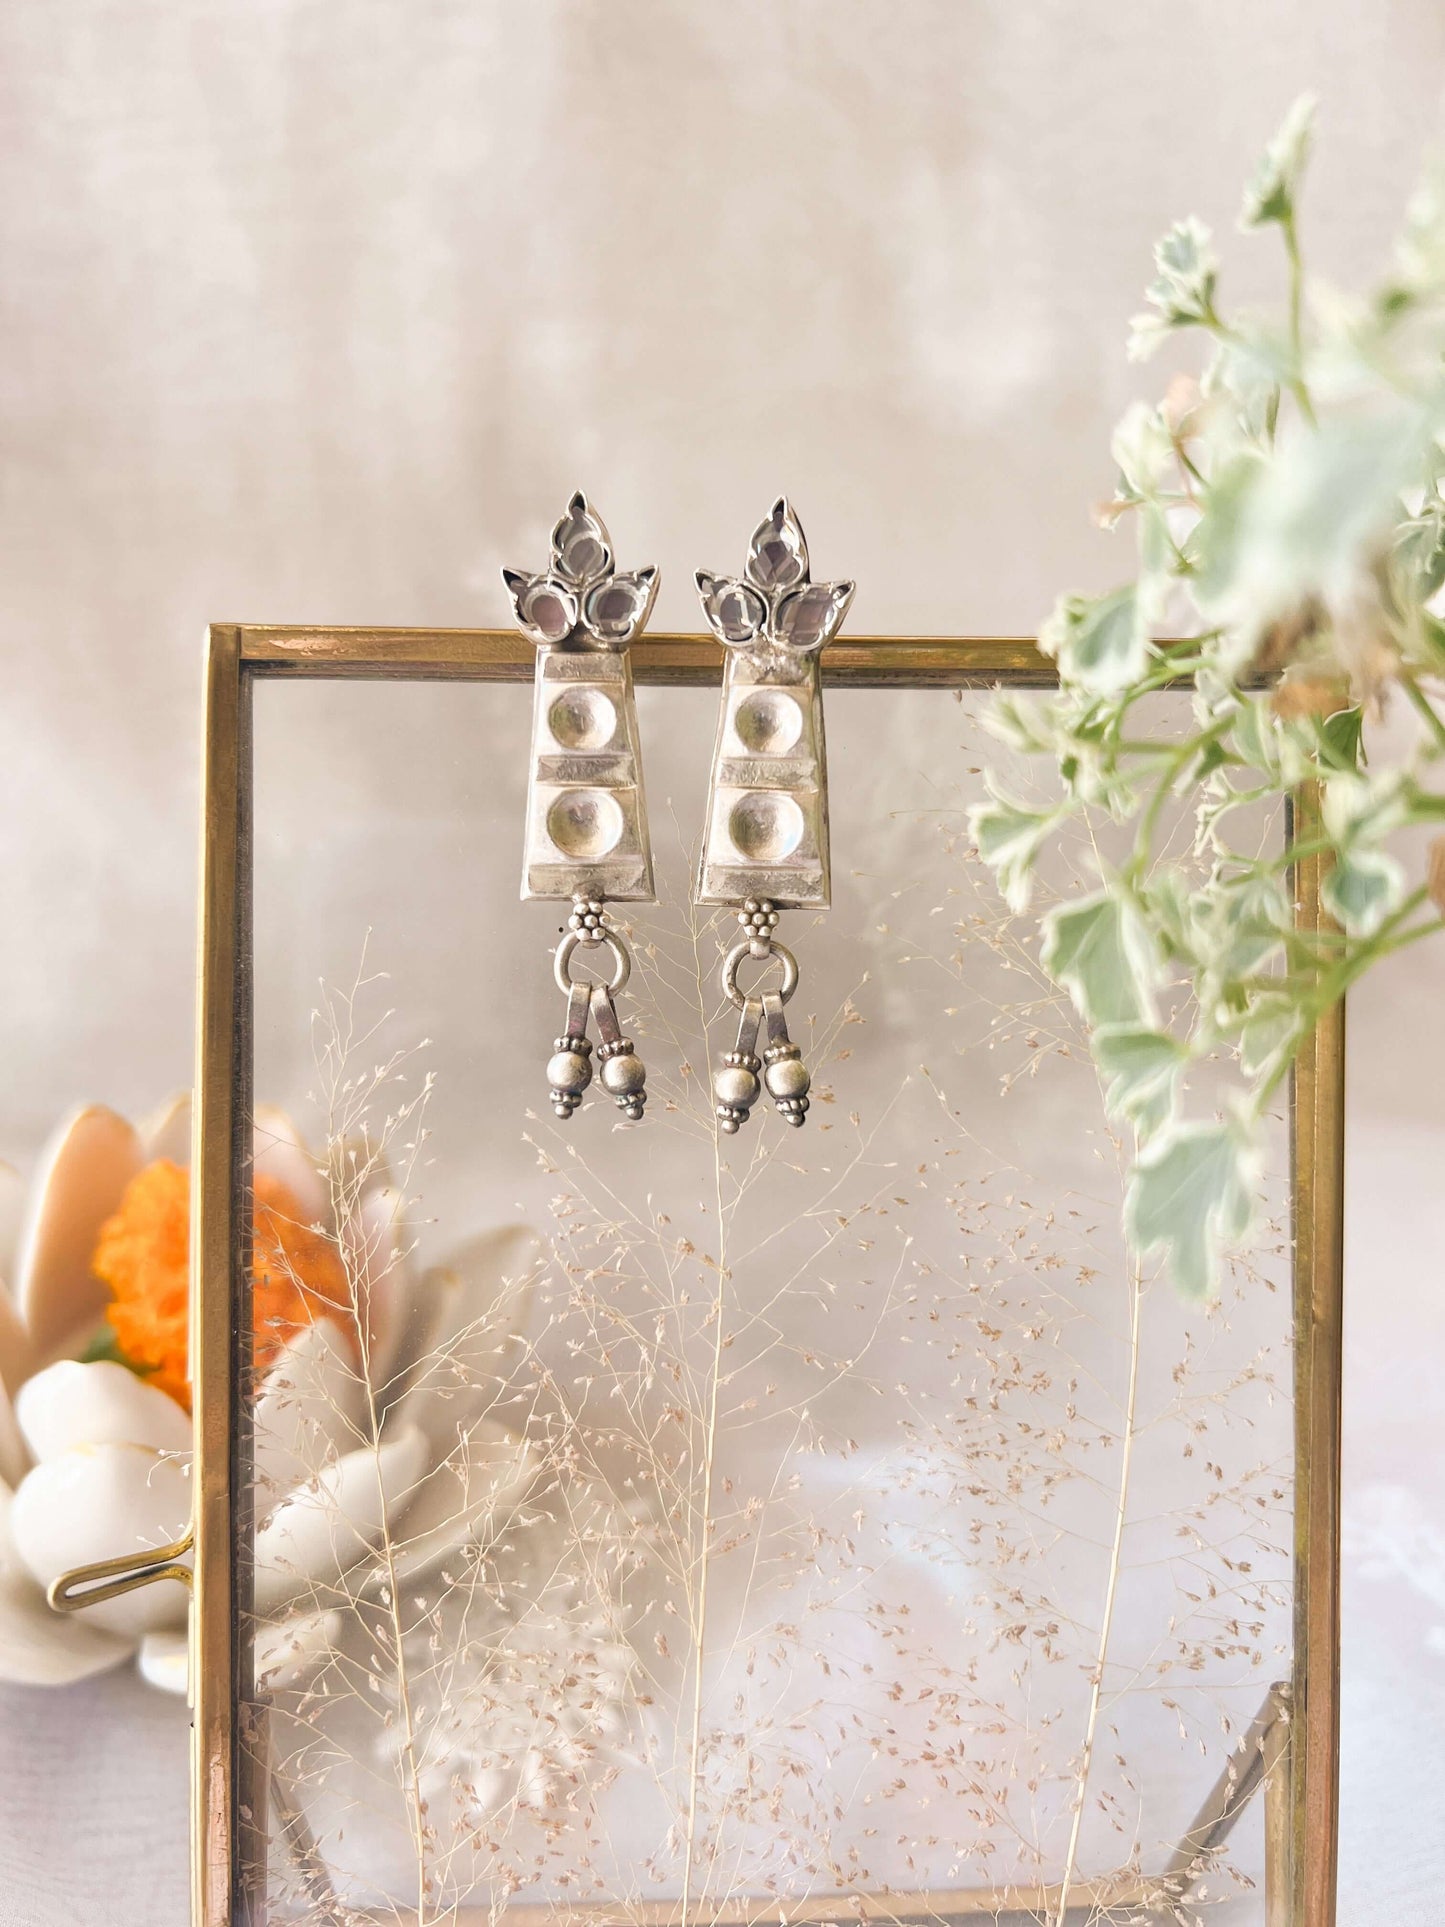 Kashvi earring in oxidised silver with ghunghroo hanging